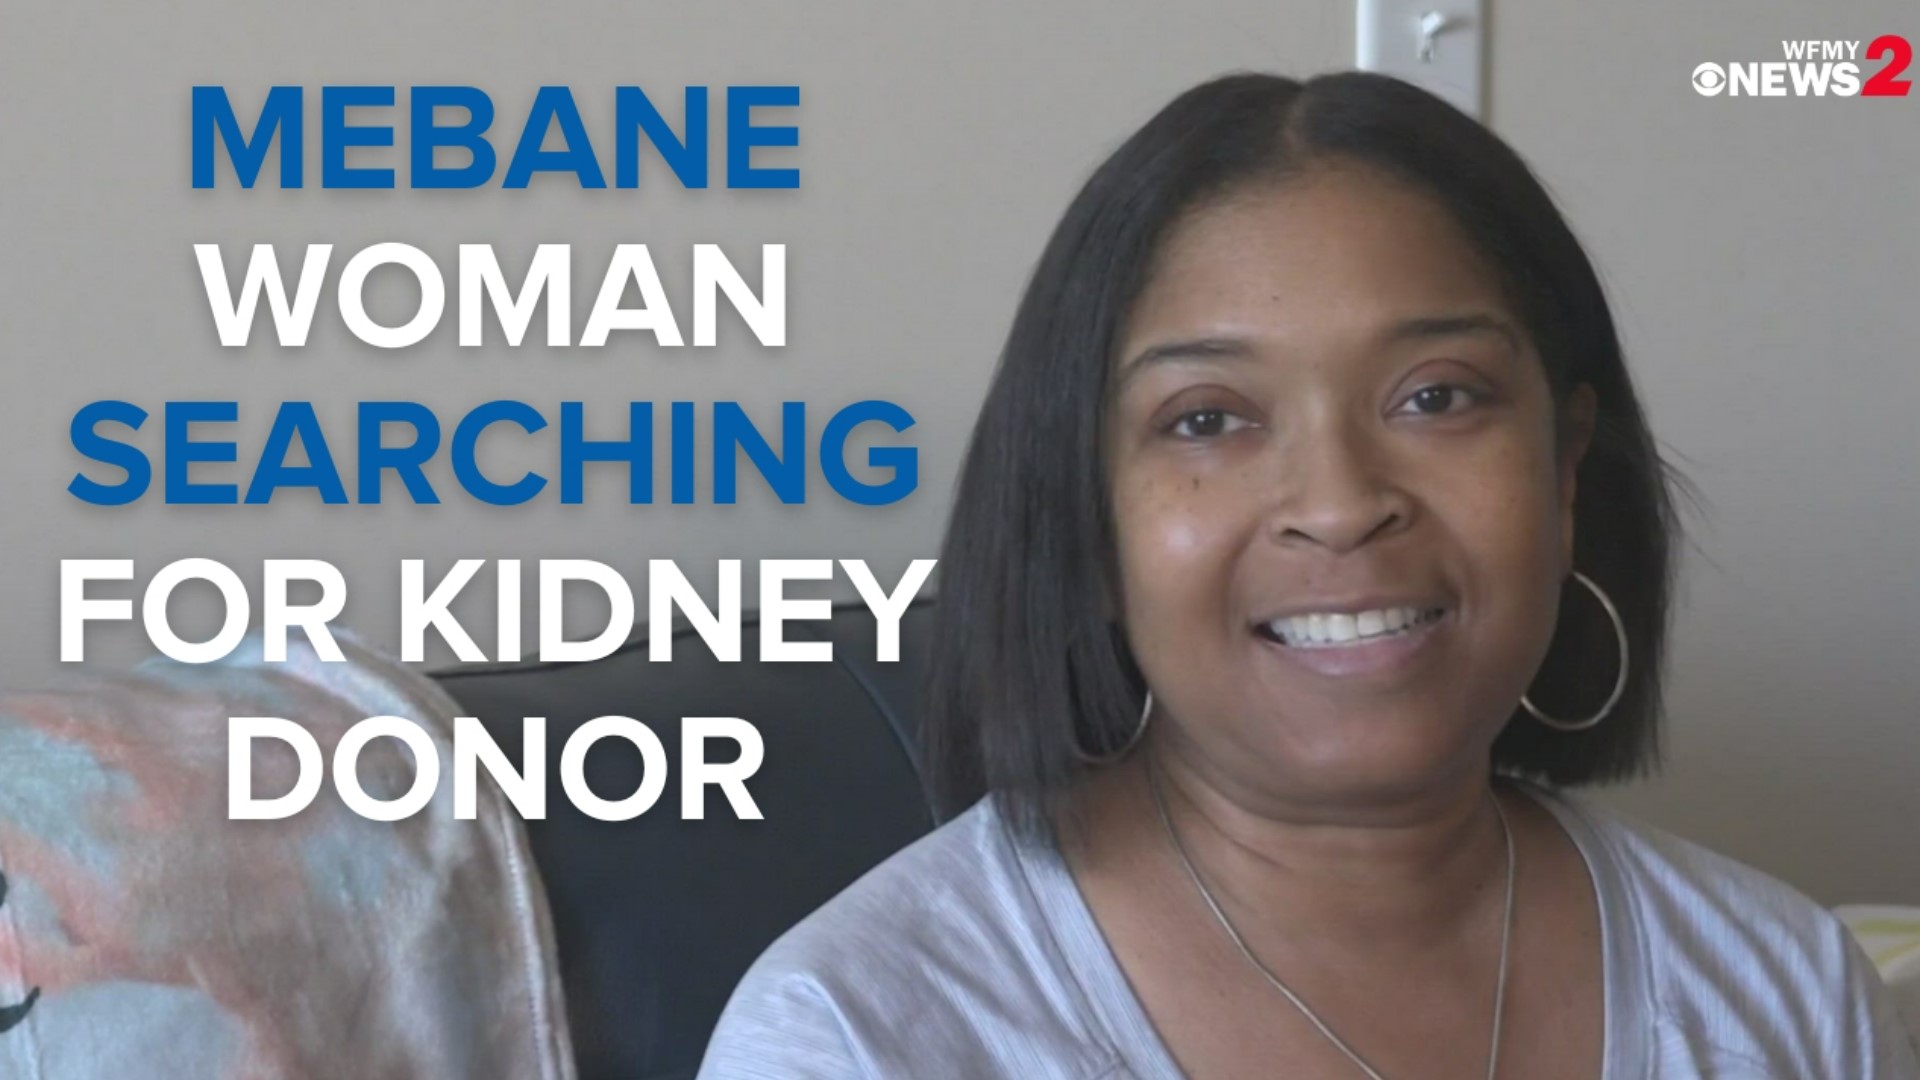 Katina Johnson of Mebane shares her powerful story while she waits for a kidney transplant.